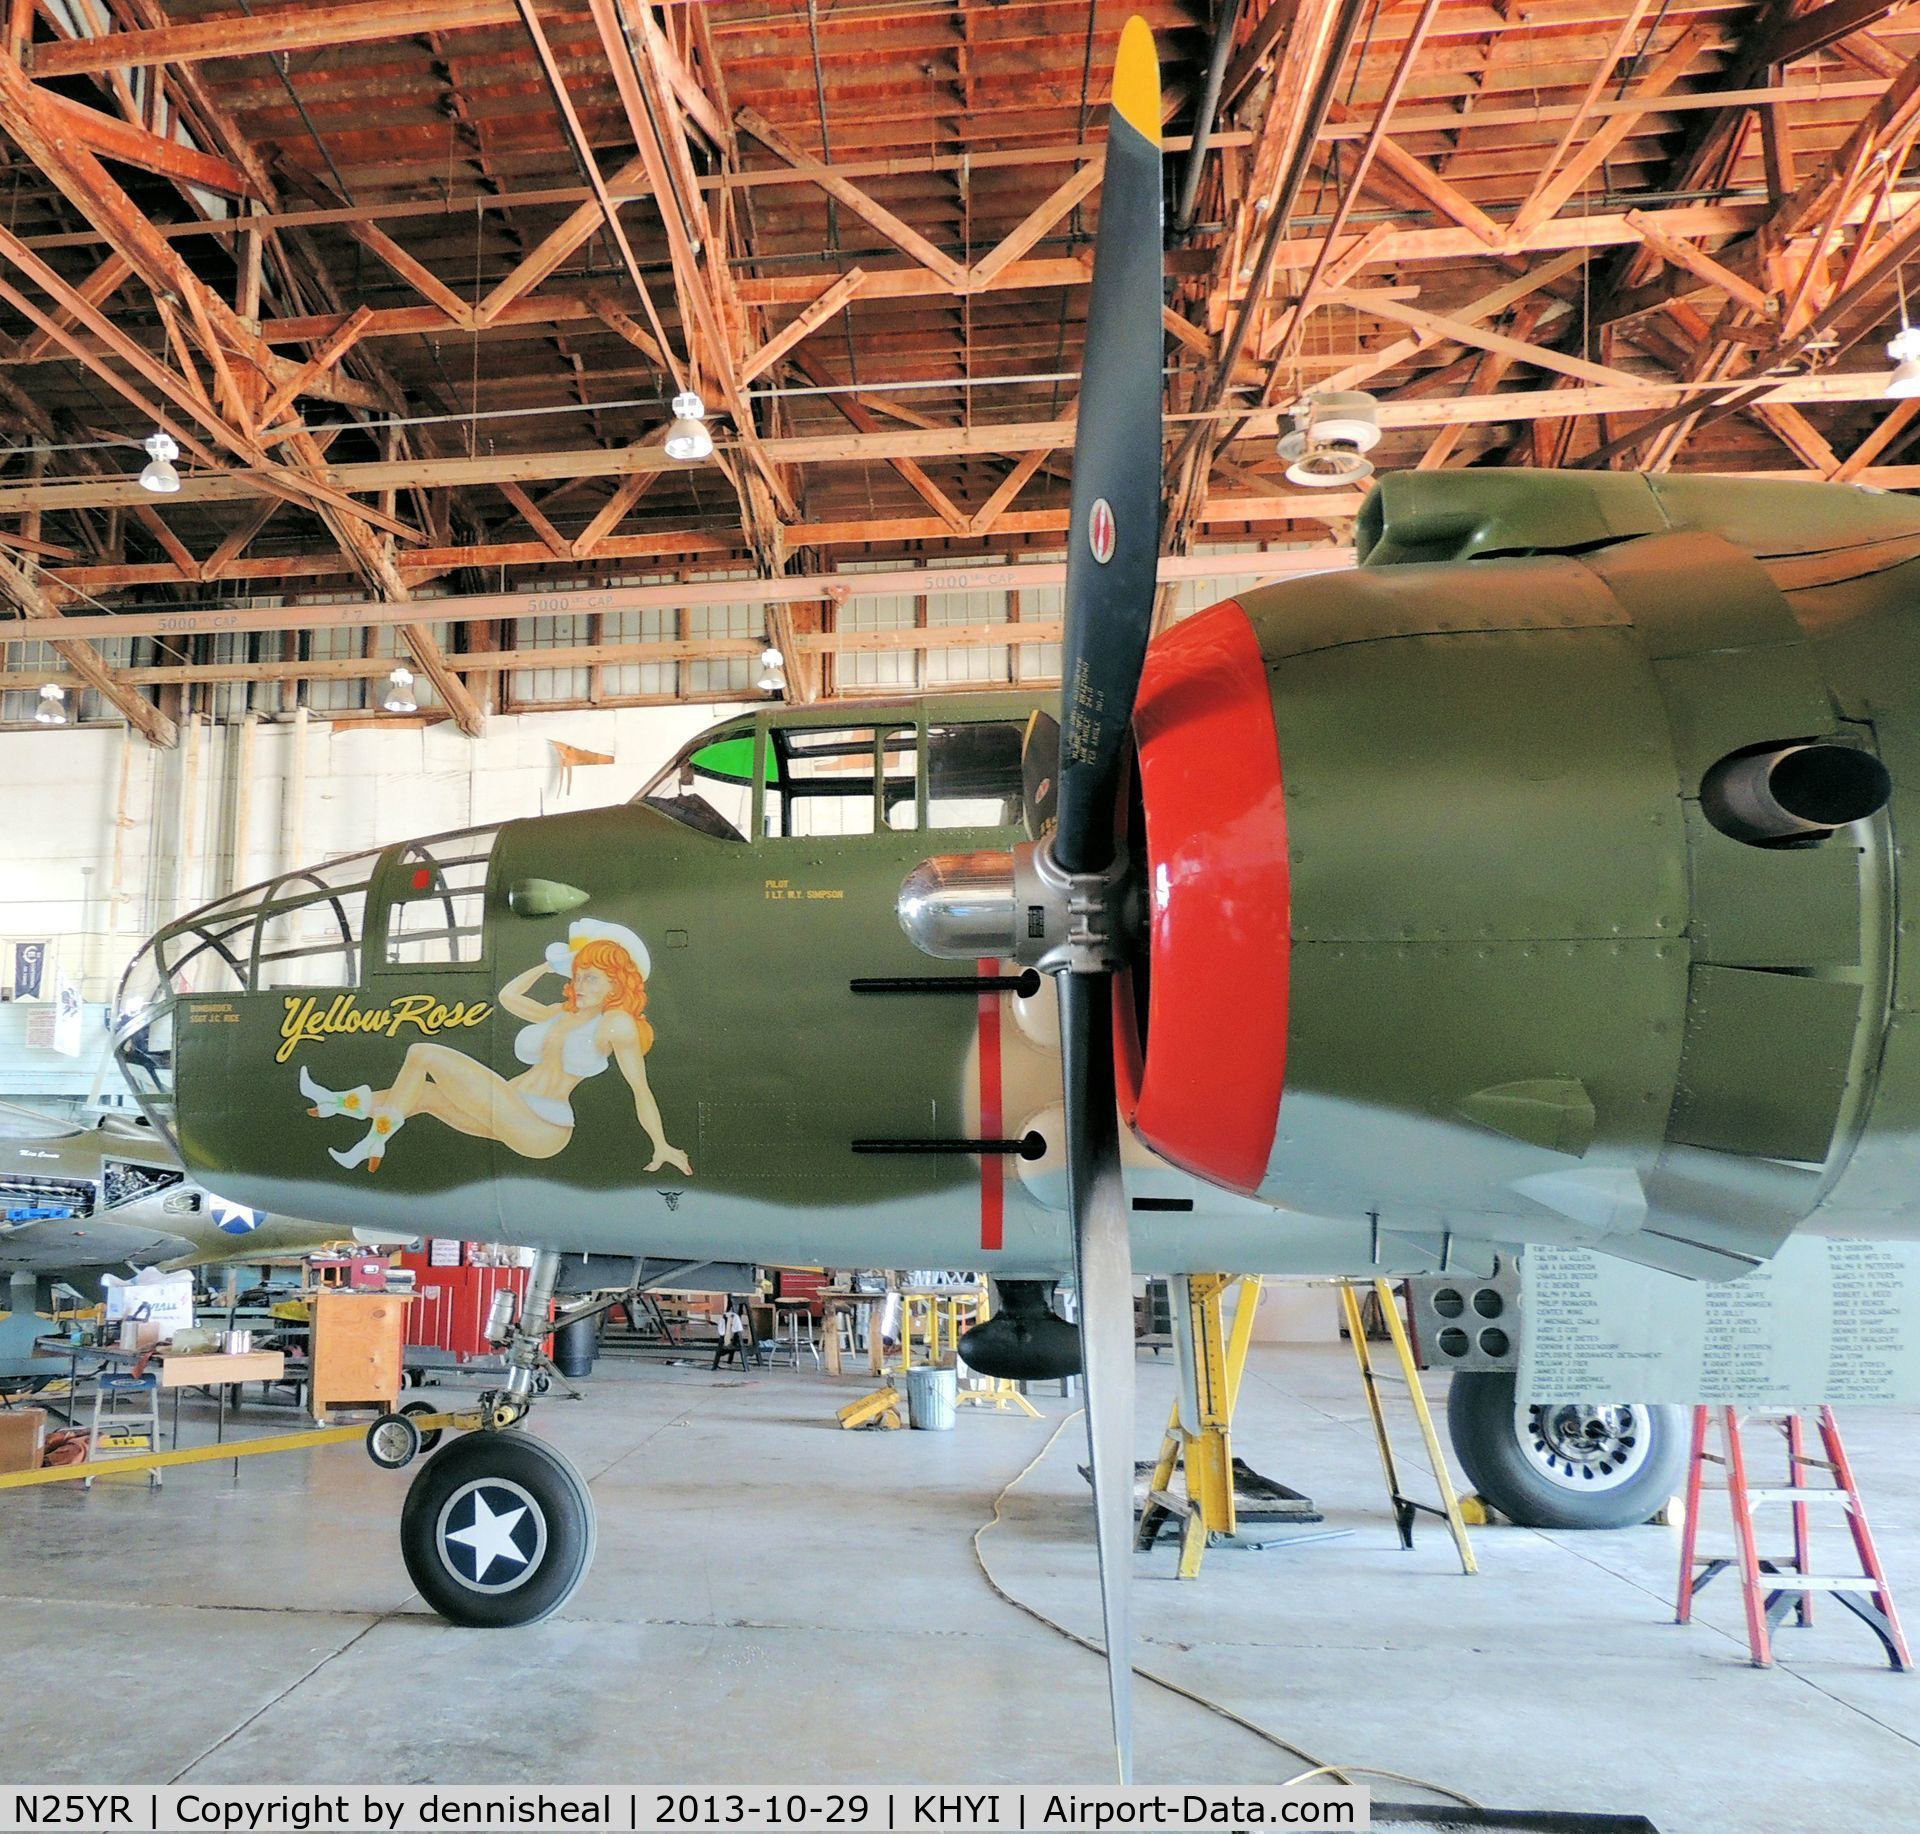 N25YR, 1943 North American TB-25N Mitchell C/N 108-34881, 1943 NORTH AMERICAN TB-25N, THE YELLOW ROSE OF TEXAS IN HER HANGER IN SAN MARCOS, TEXAS